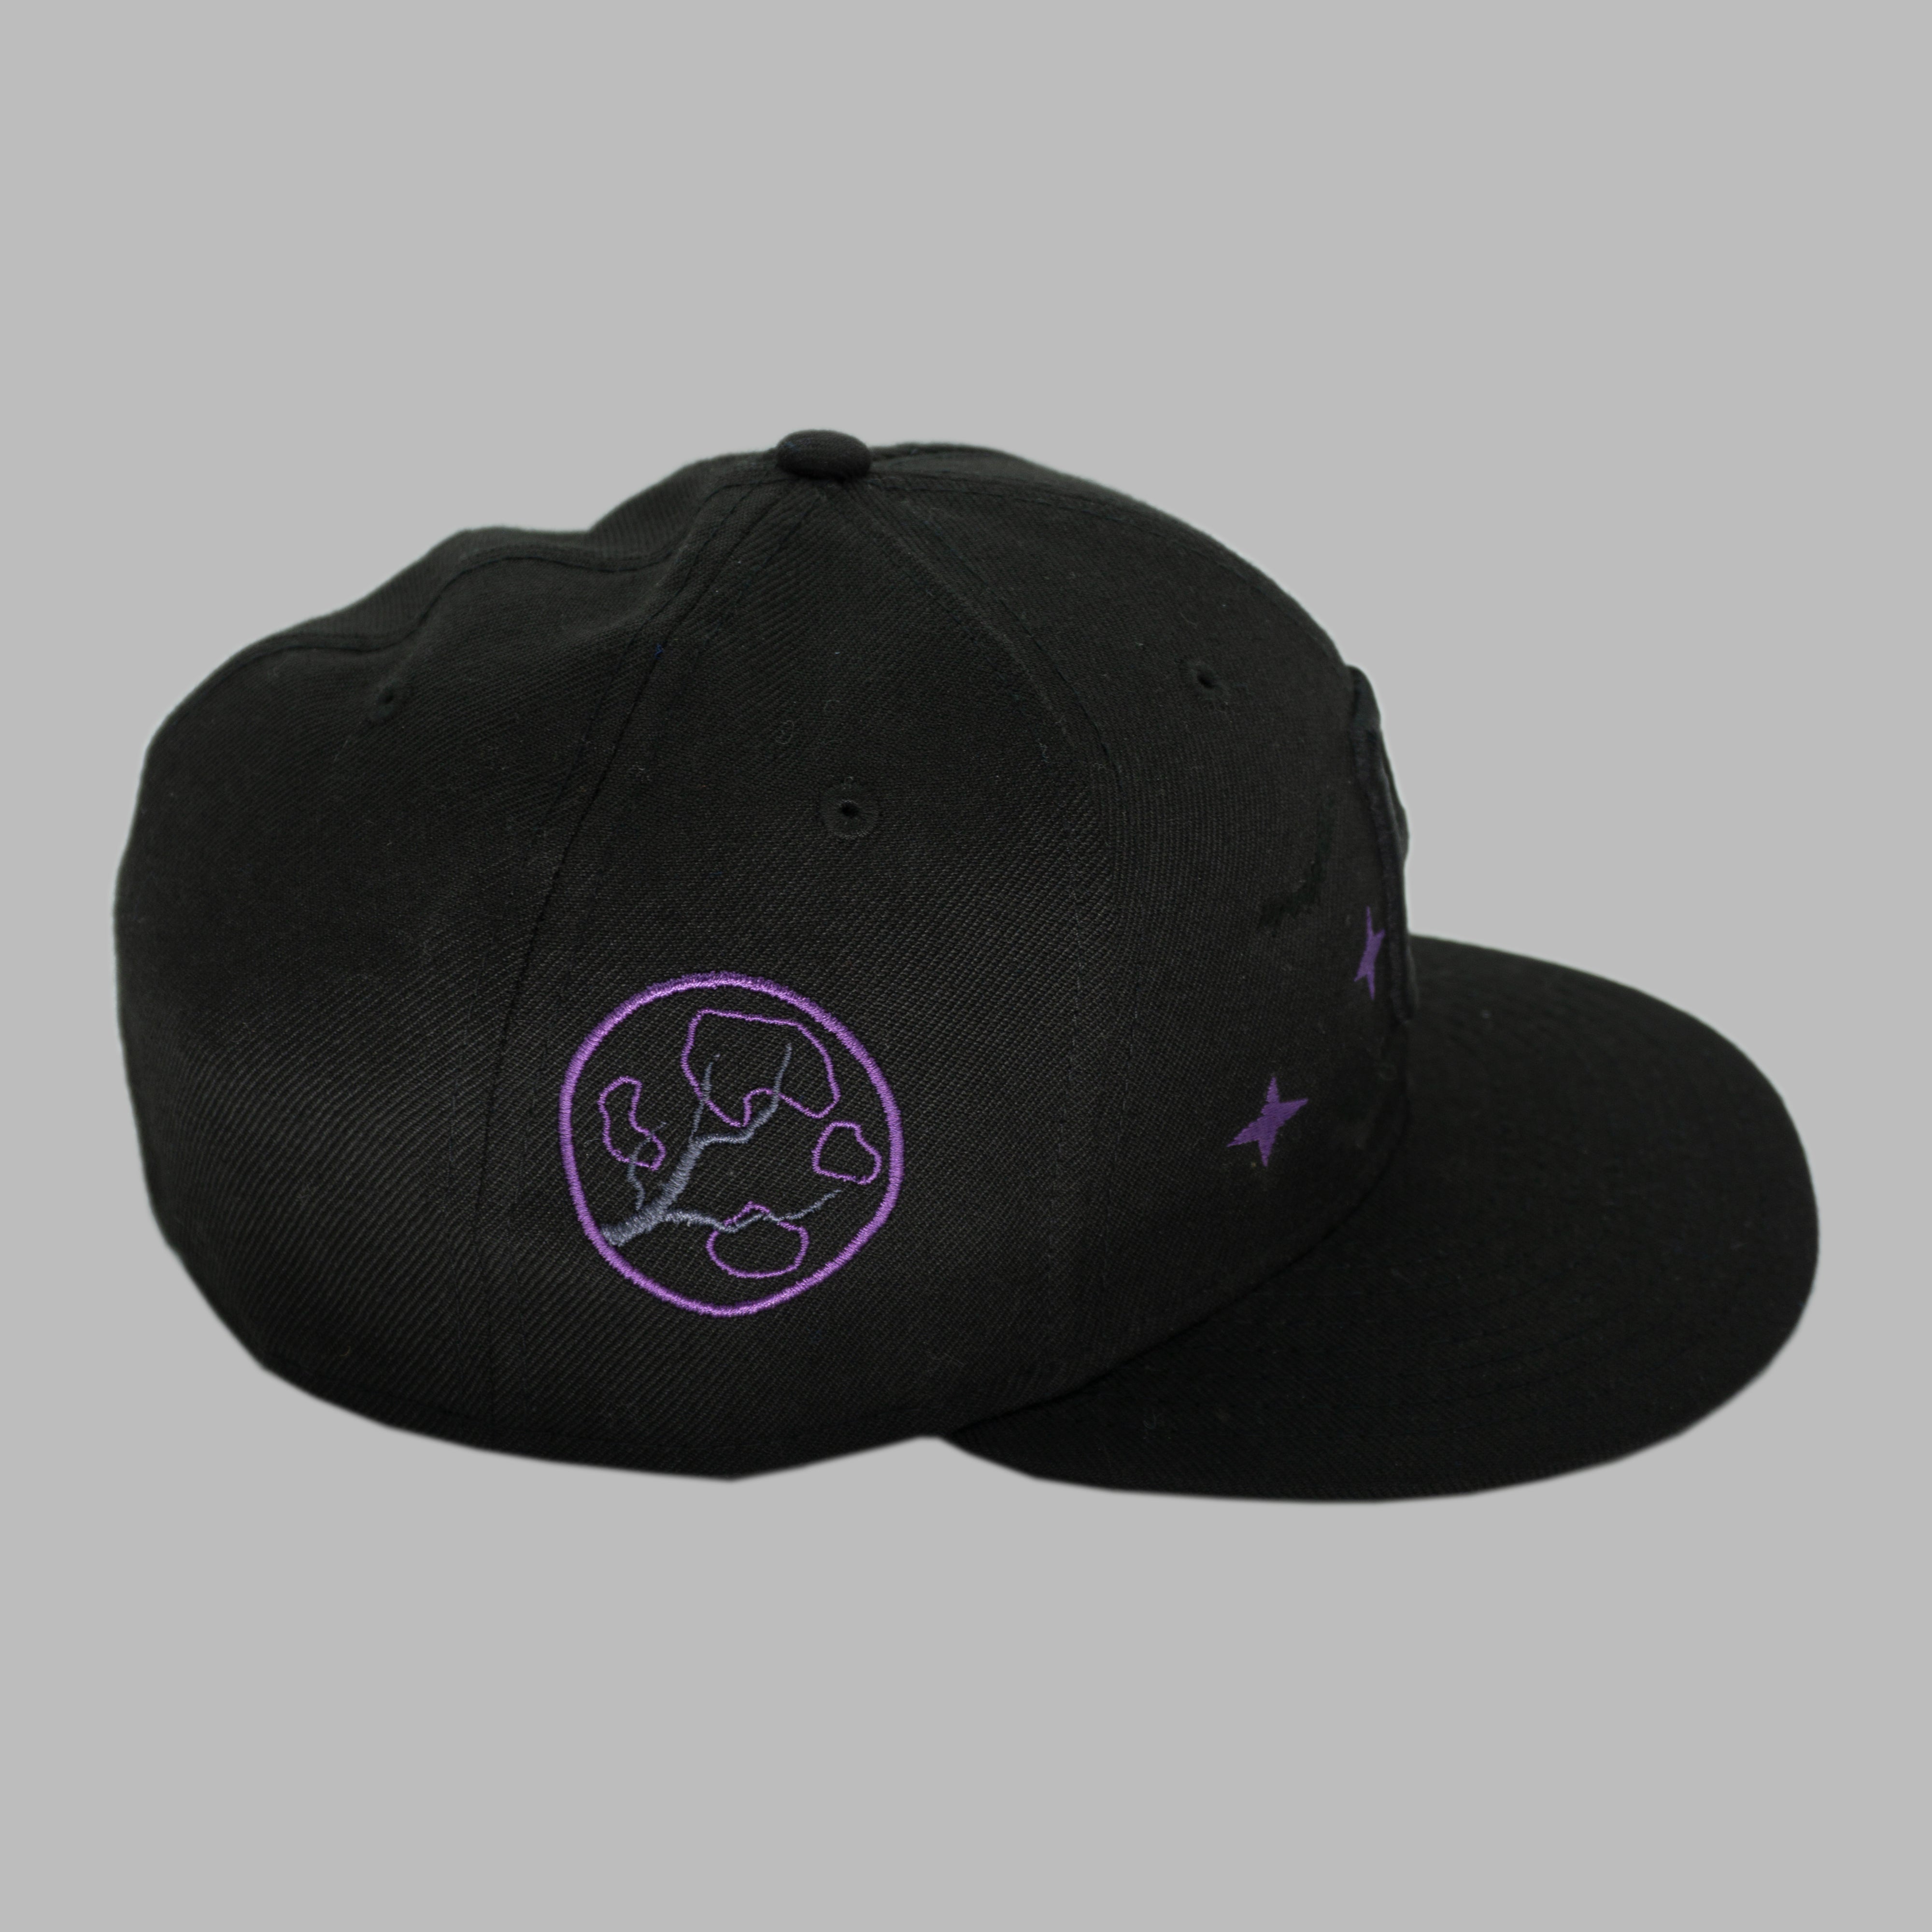 BLACK MIDNIGHT FITTED (size 7 5/8)